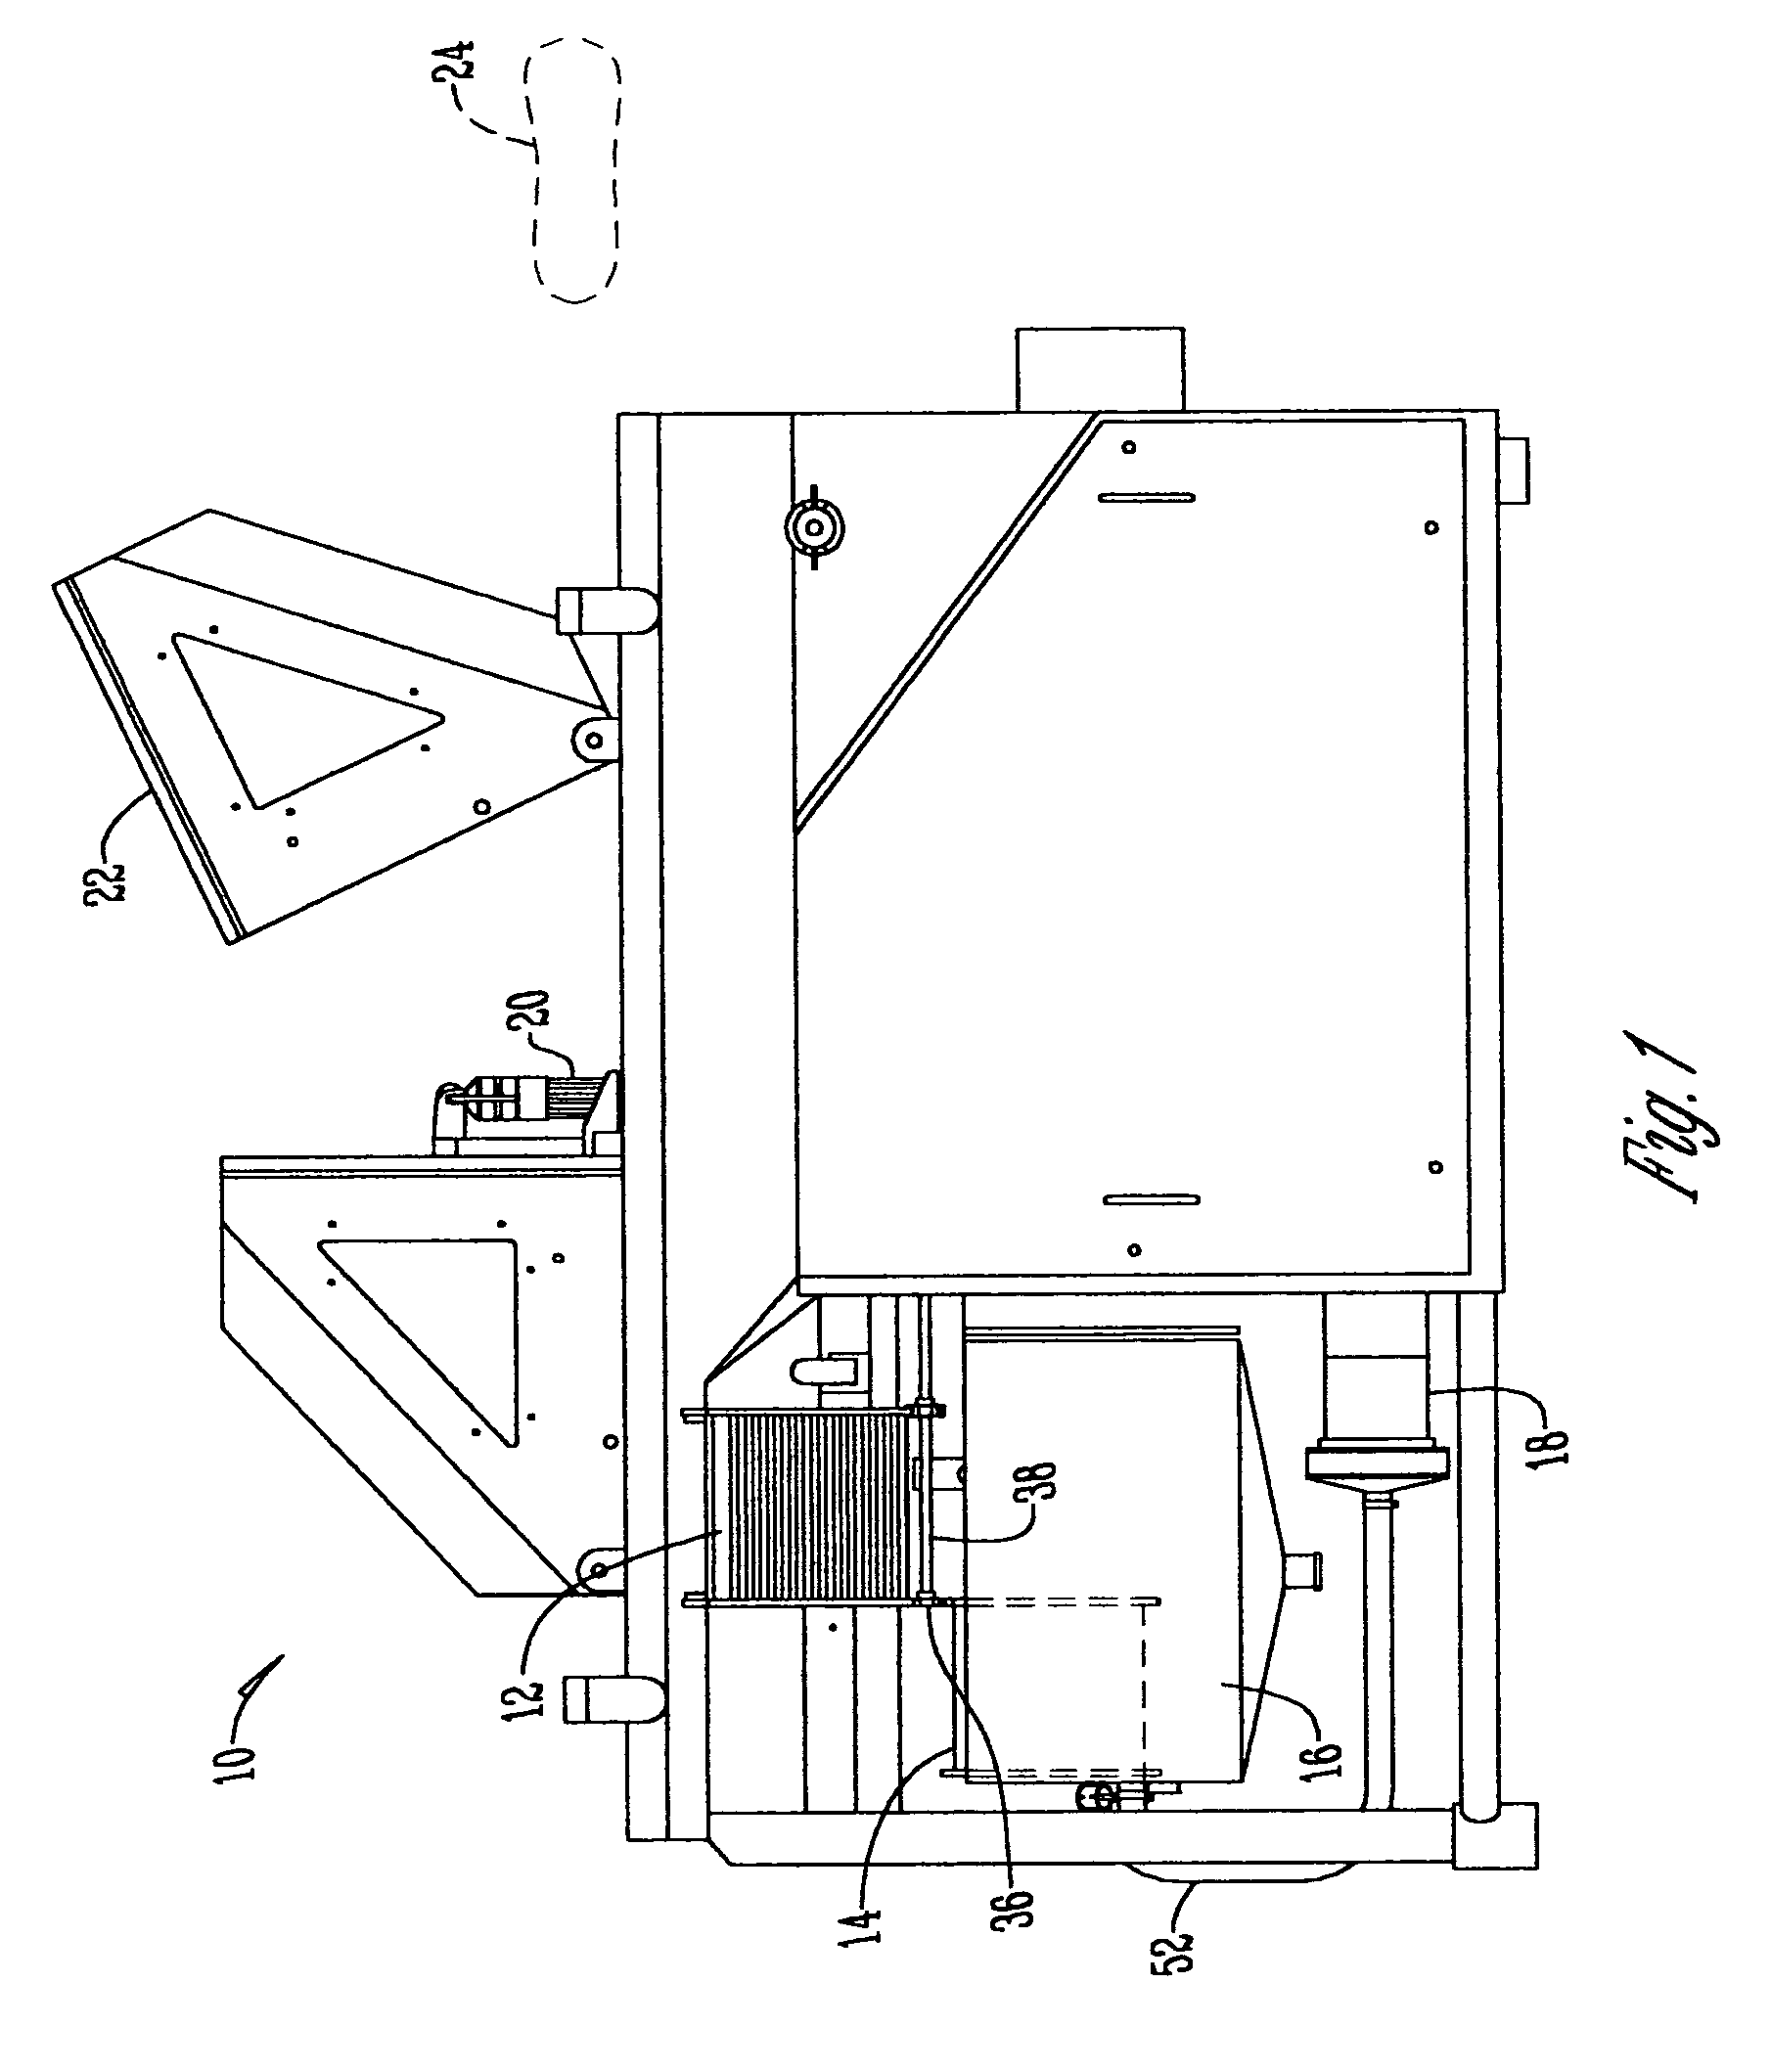 Dual filter system for filtering of injector fluids